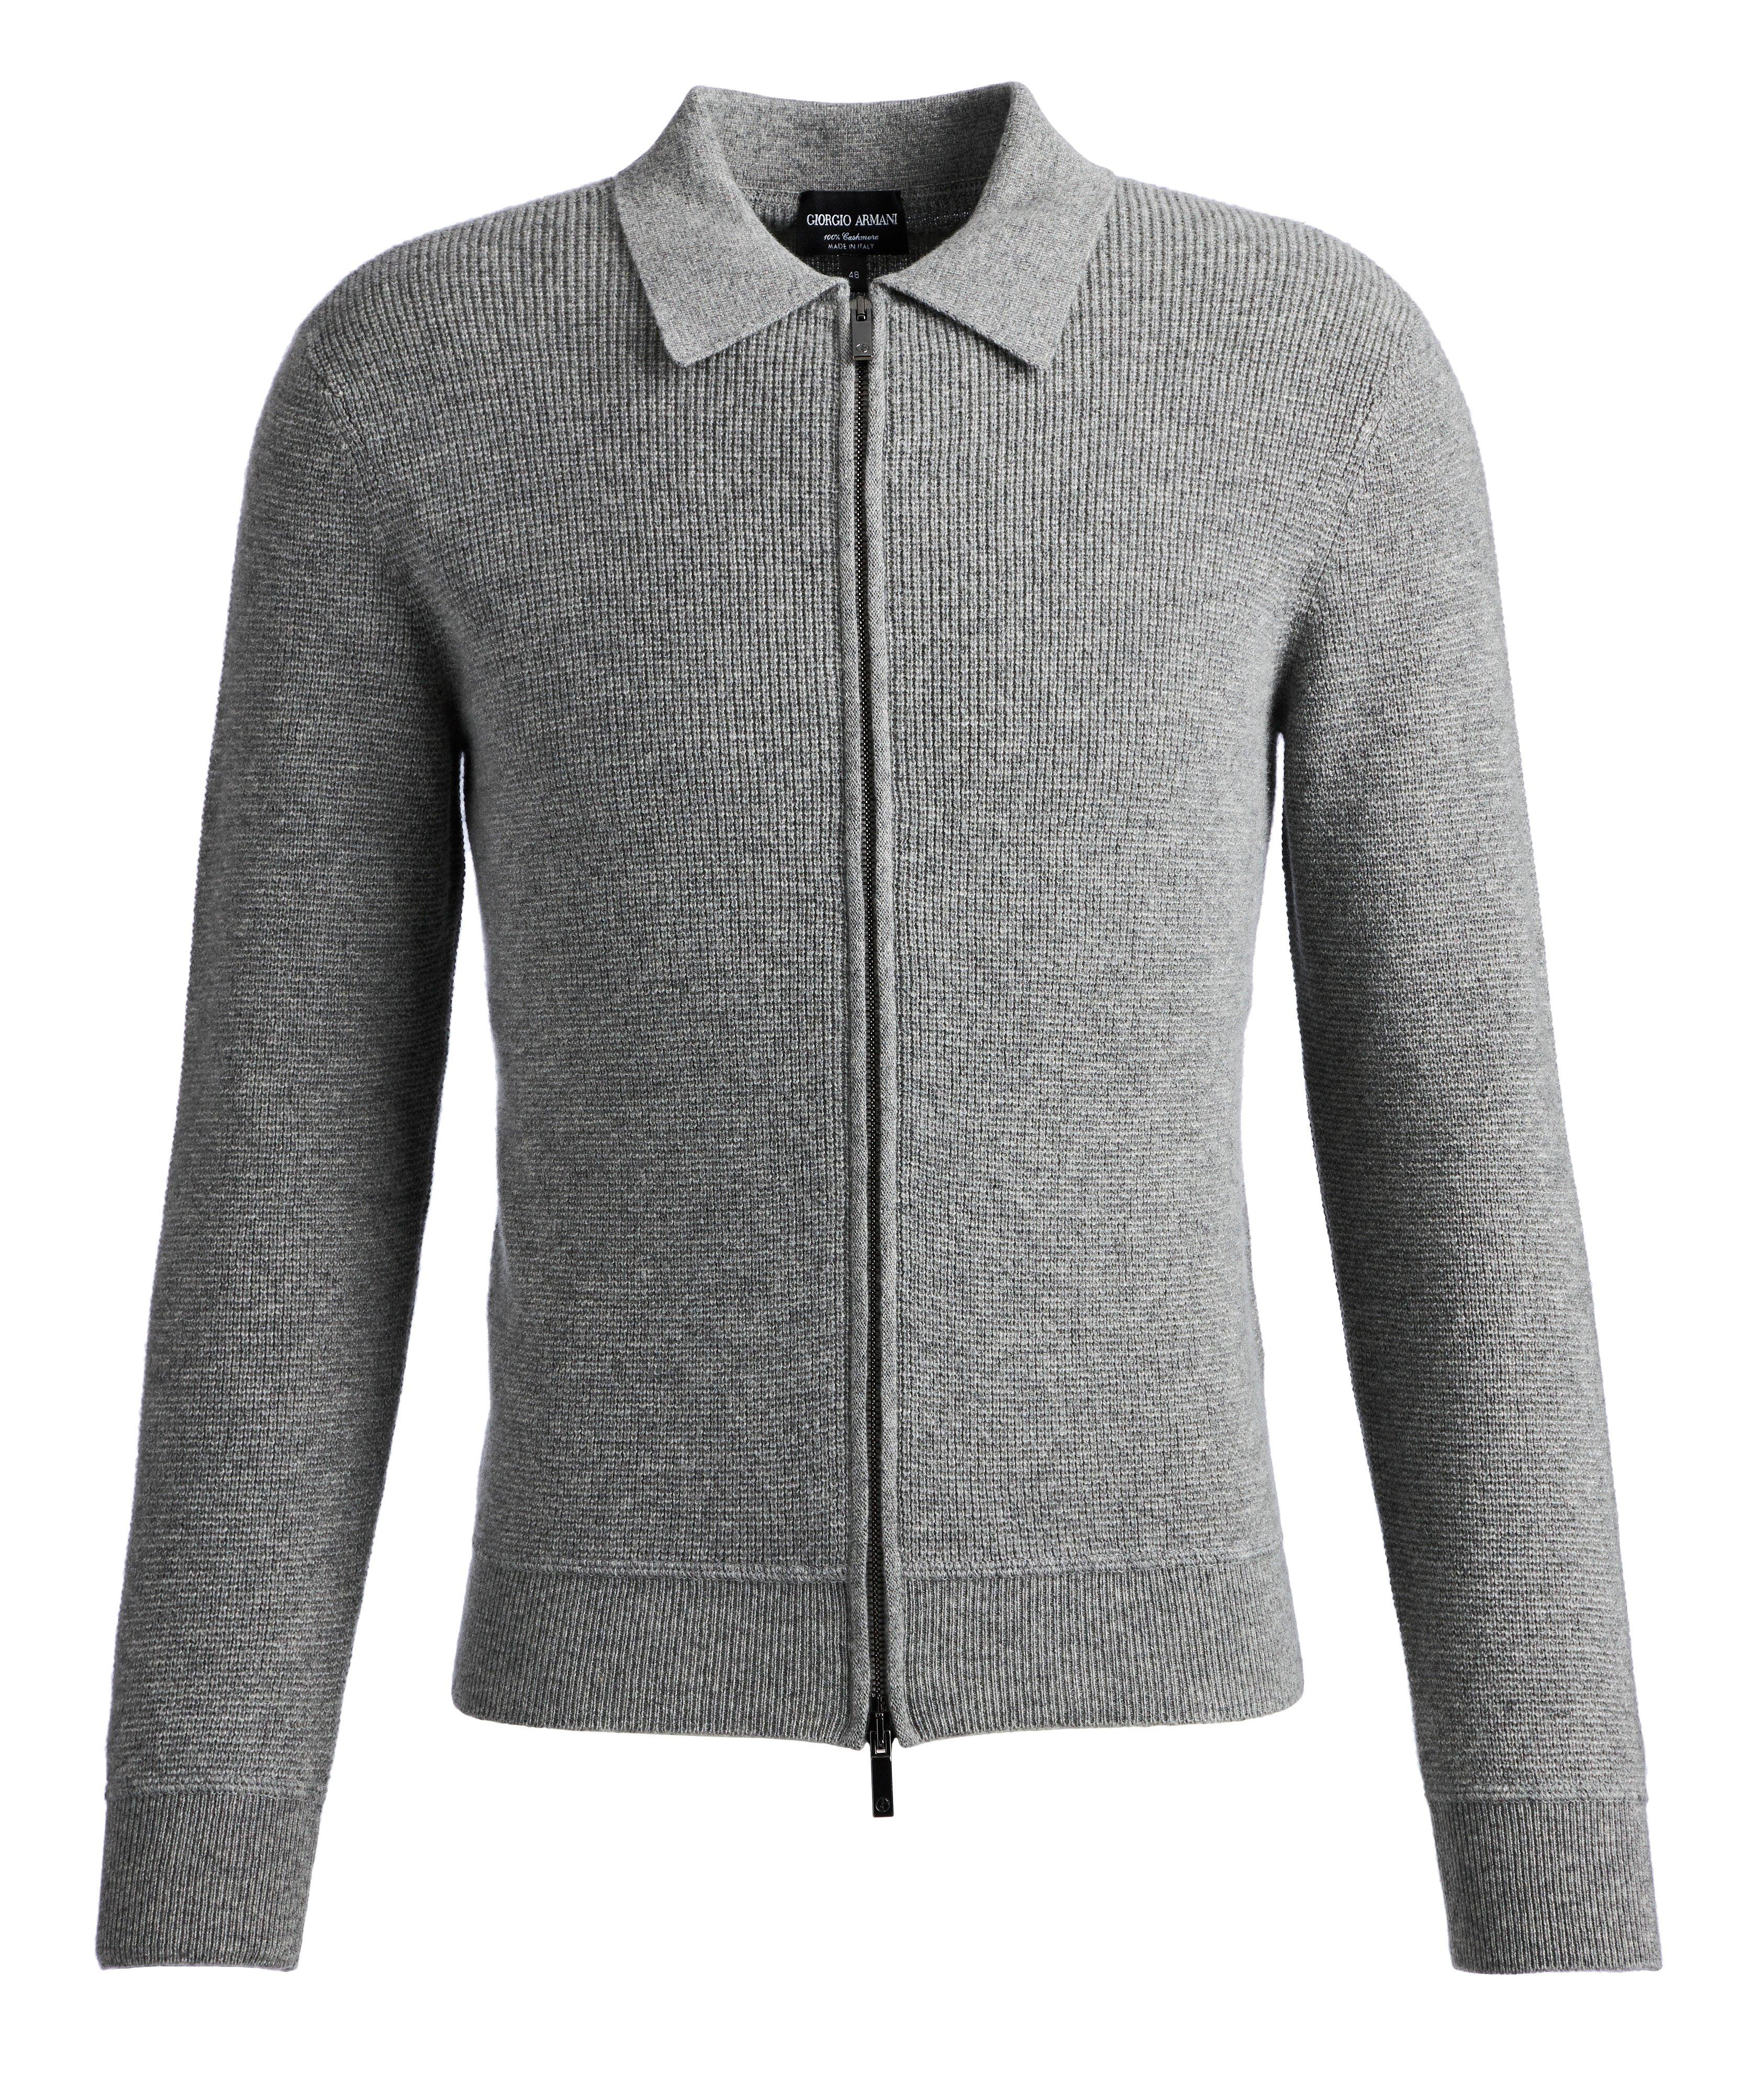 Zip-Up Cashmere Sweater image 0